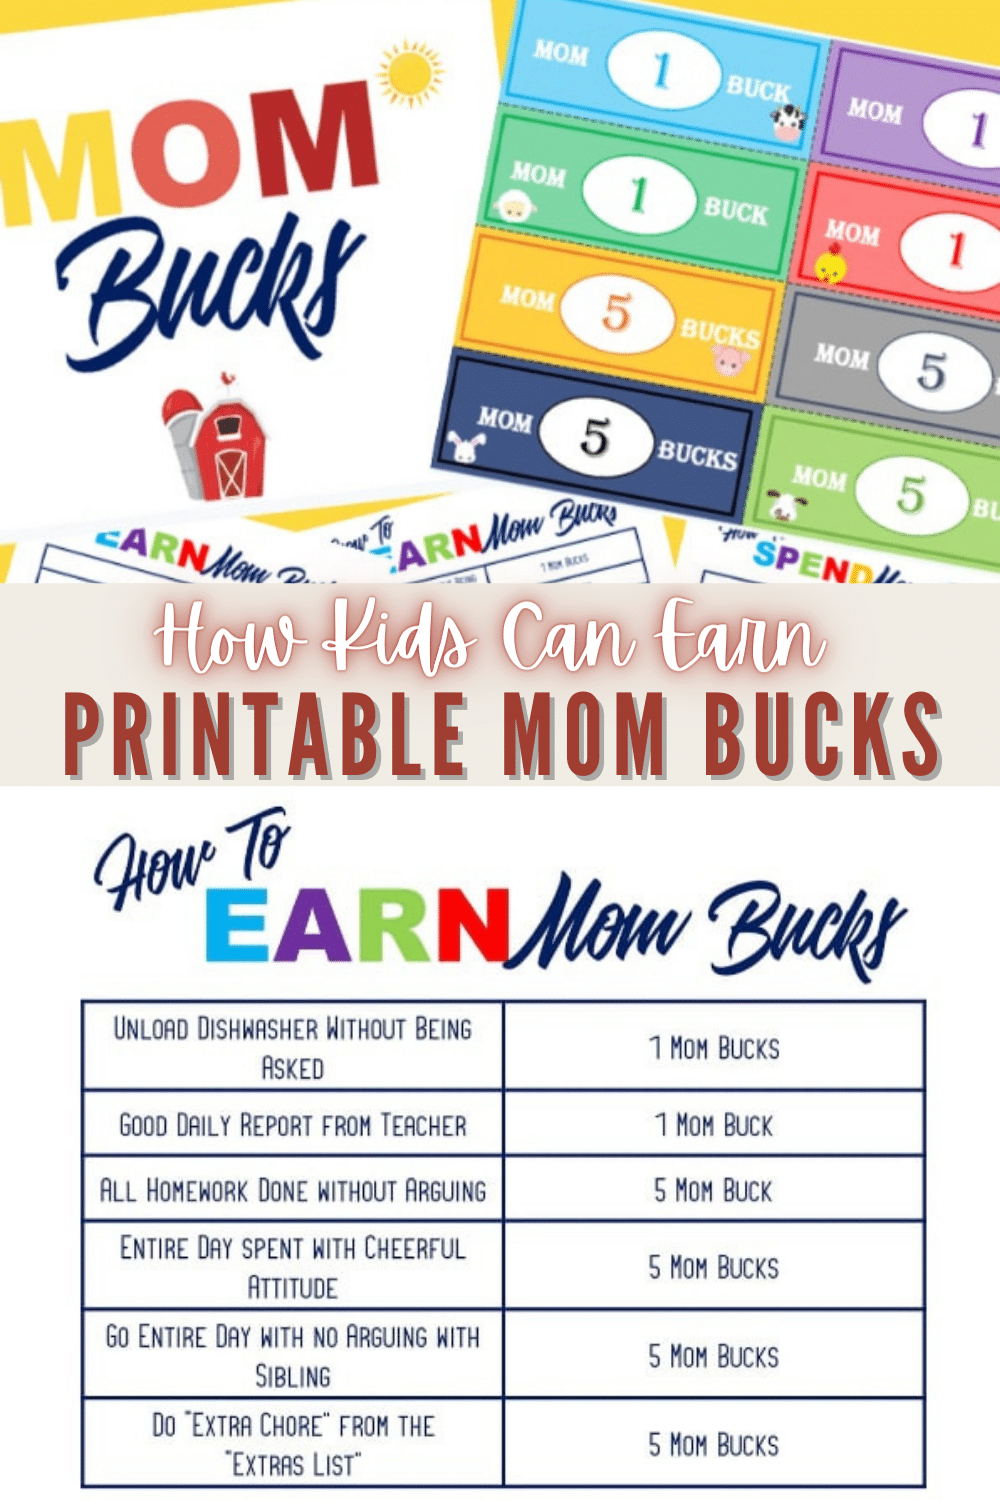 These printable mom bucks will help encourage your kids to complete tasks around the house so they can earn extra treats and time with mom! #printables #mombucks #parentinghack via @wondermomwannab